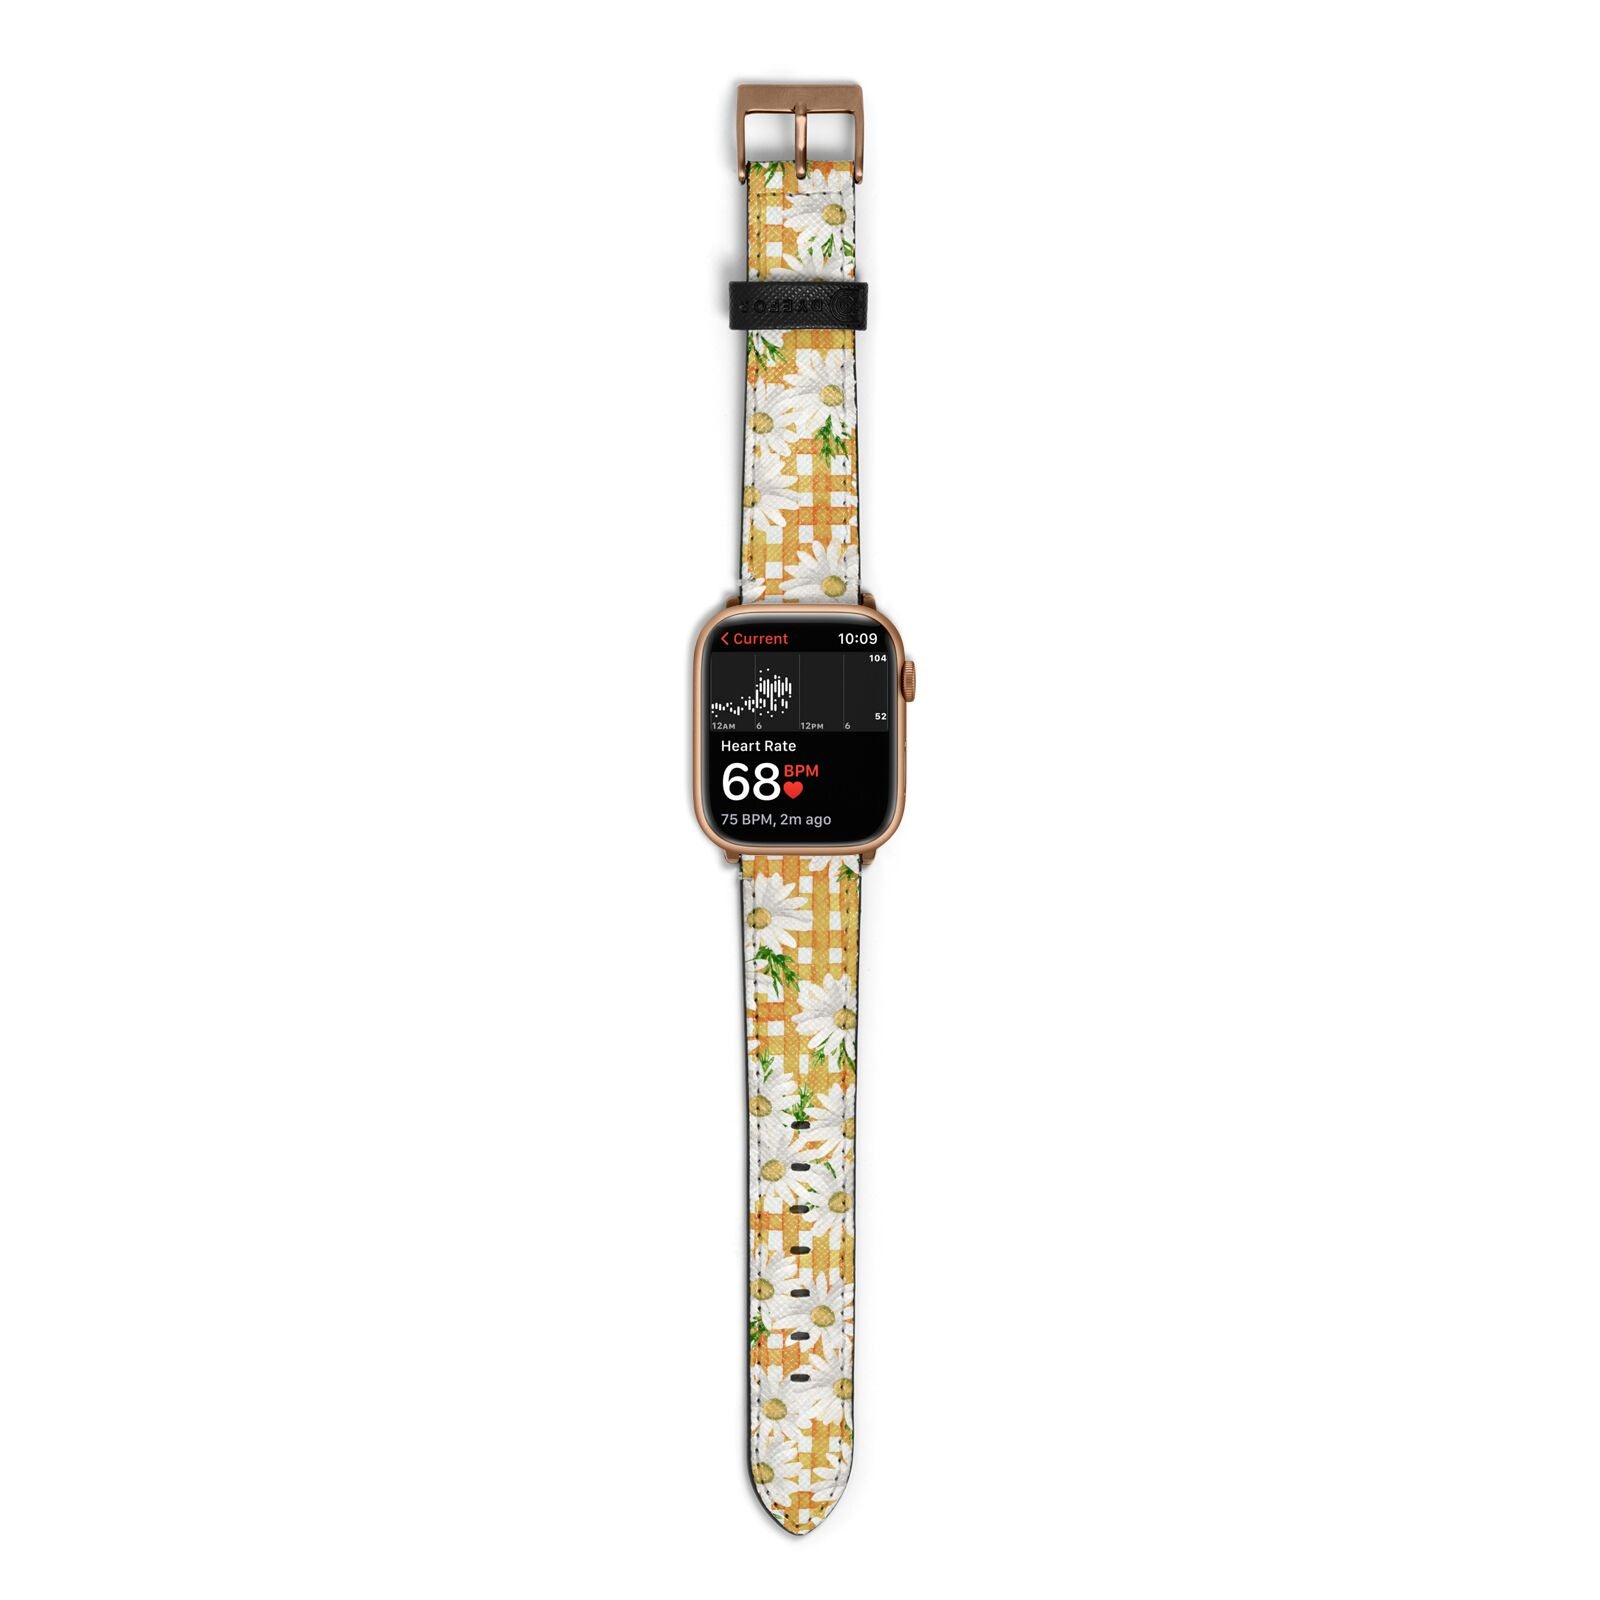 Checkered Daisy Apple Watch Strap Size 38mm with Gold Hardware